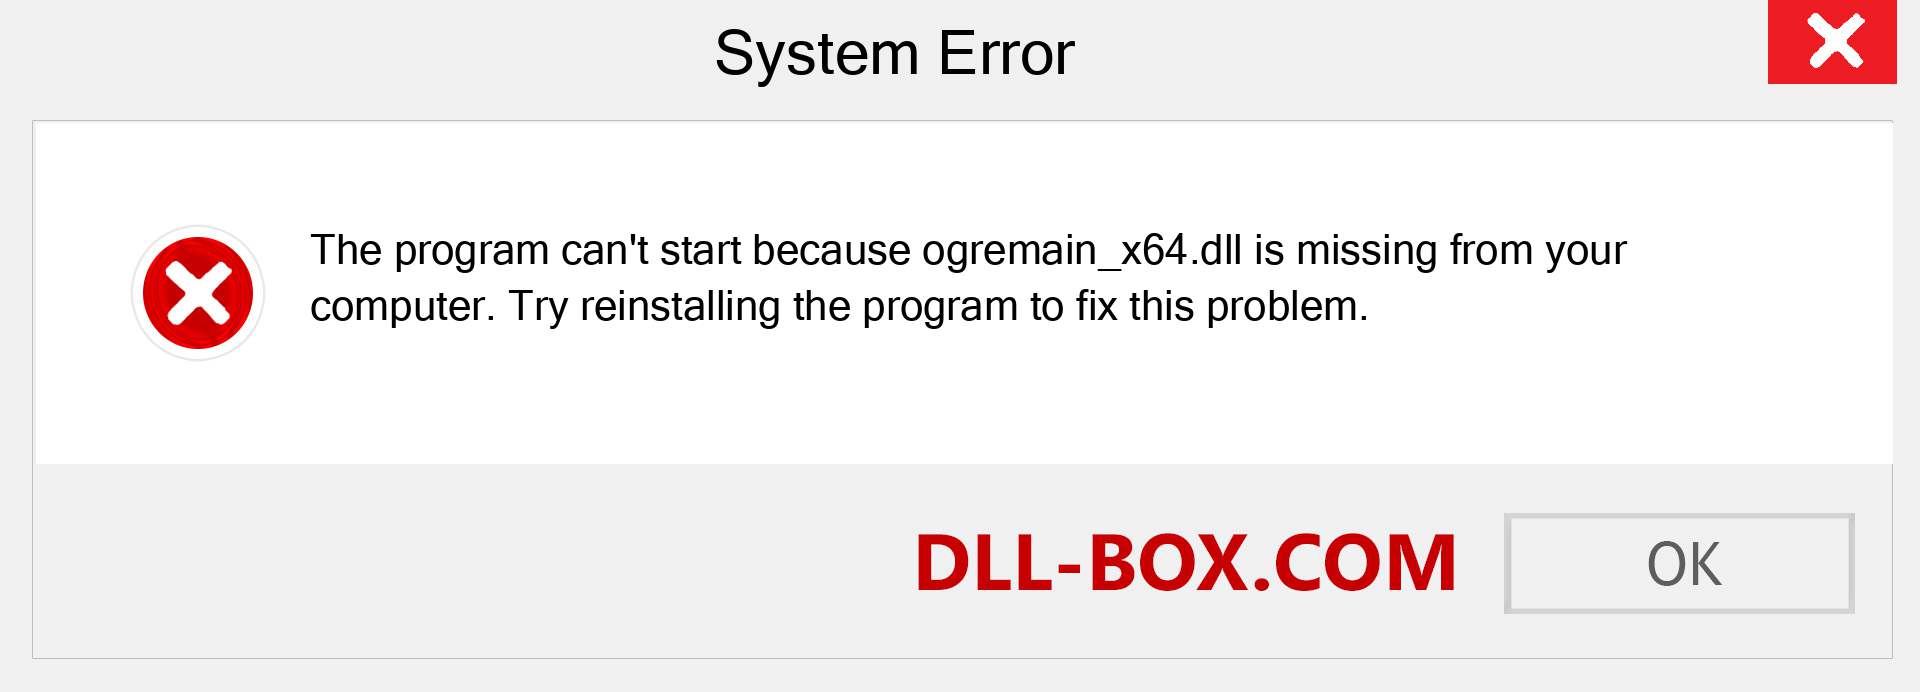  ogremain_x64.dll file is missing?. Download for Windows 7, 8, 10 - Fix  ogremain_x64 dll Missing Error on Windows, photos, images